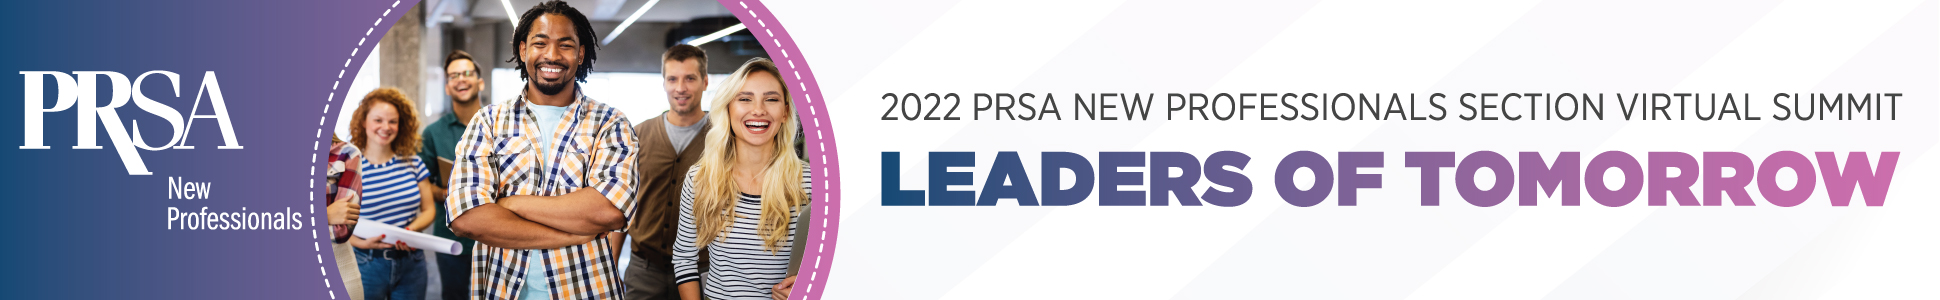 New Professionals 2022 Conference banner